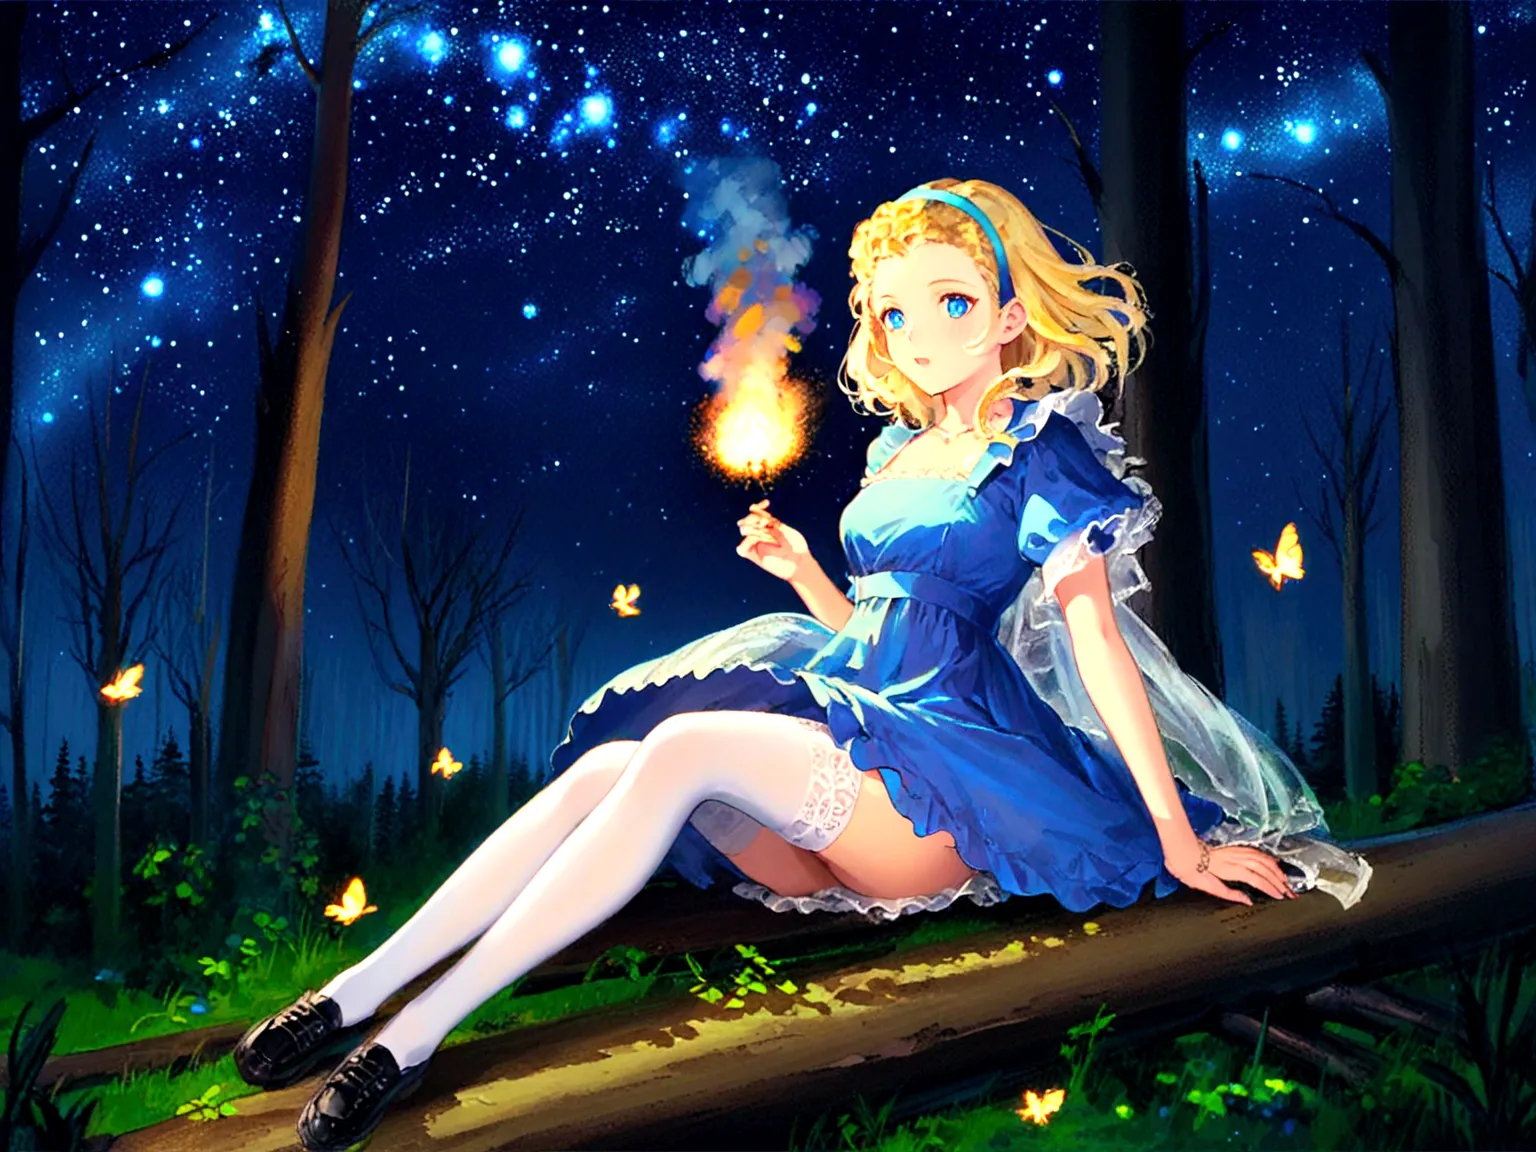 Big messy haired blonde anime woman with hairband, pale blue eyes, wearing blue dress with no sleeves, white stockings and littl...